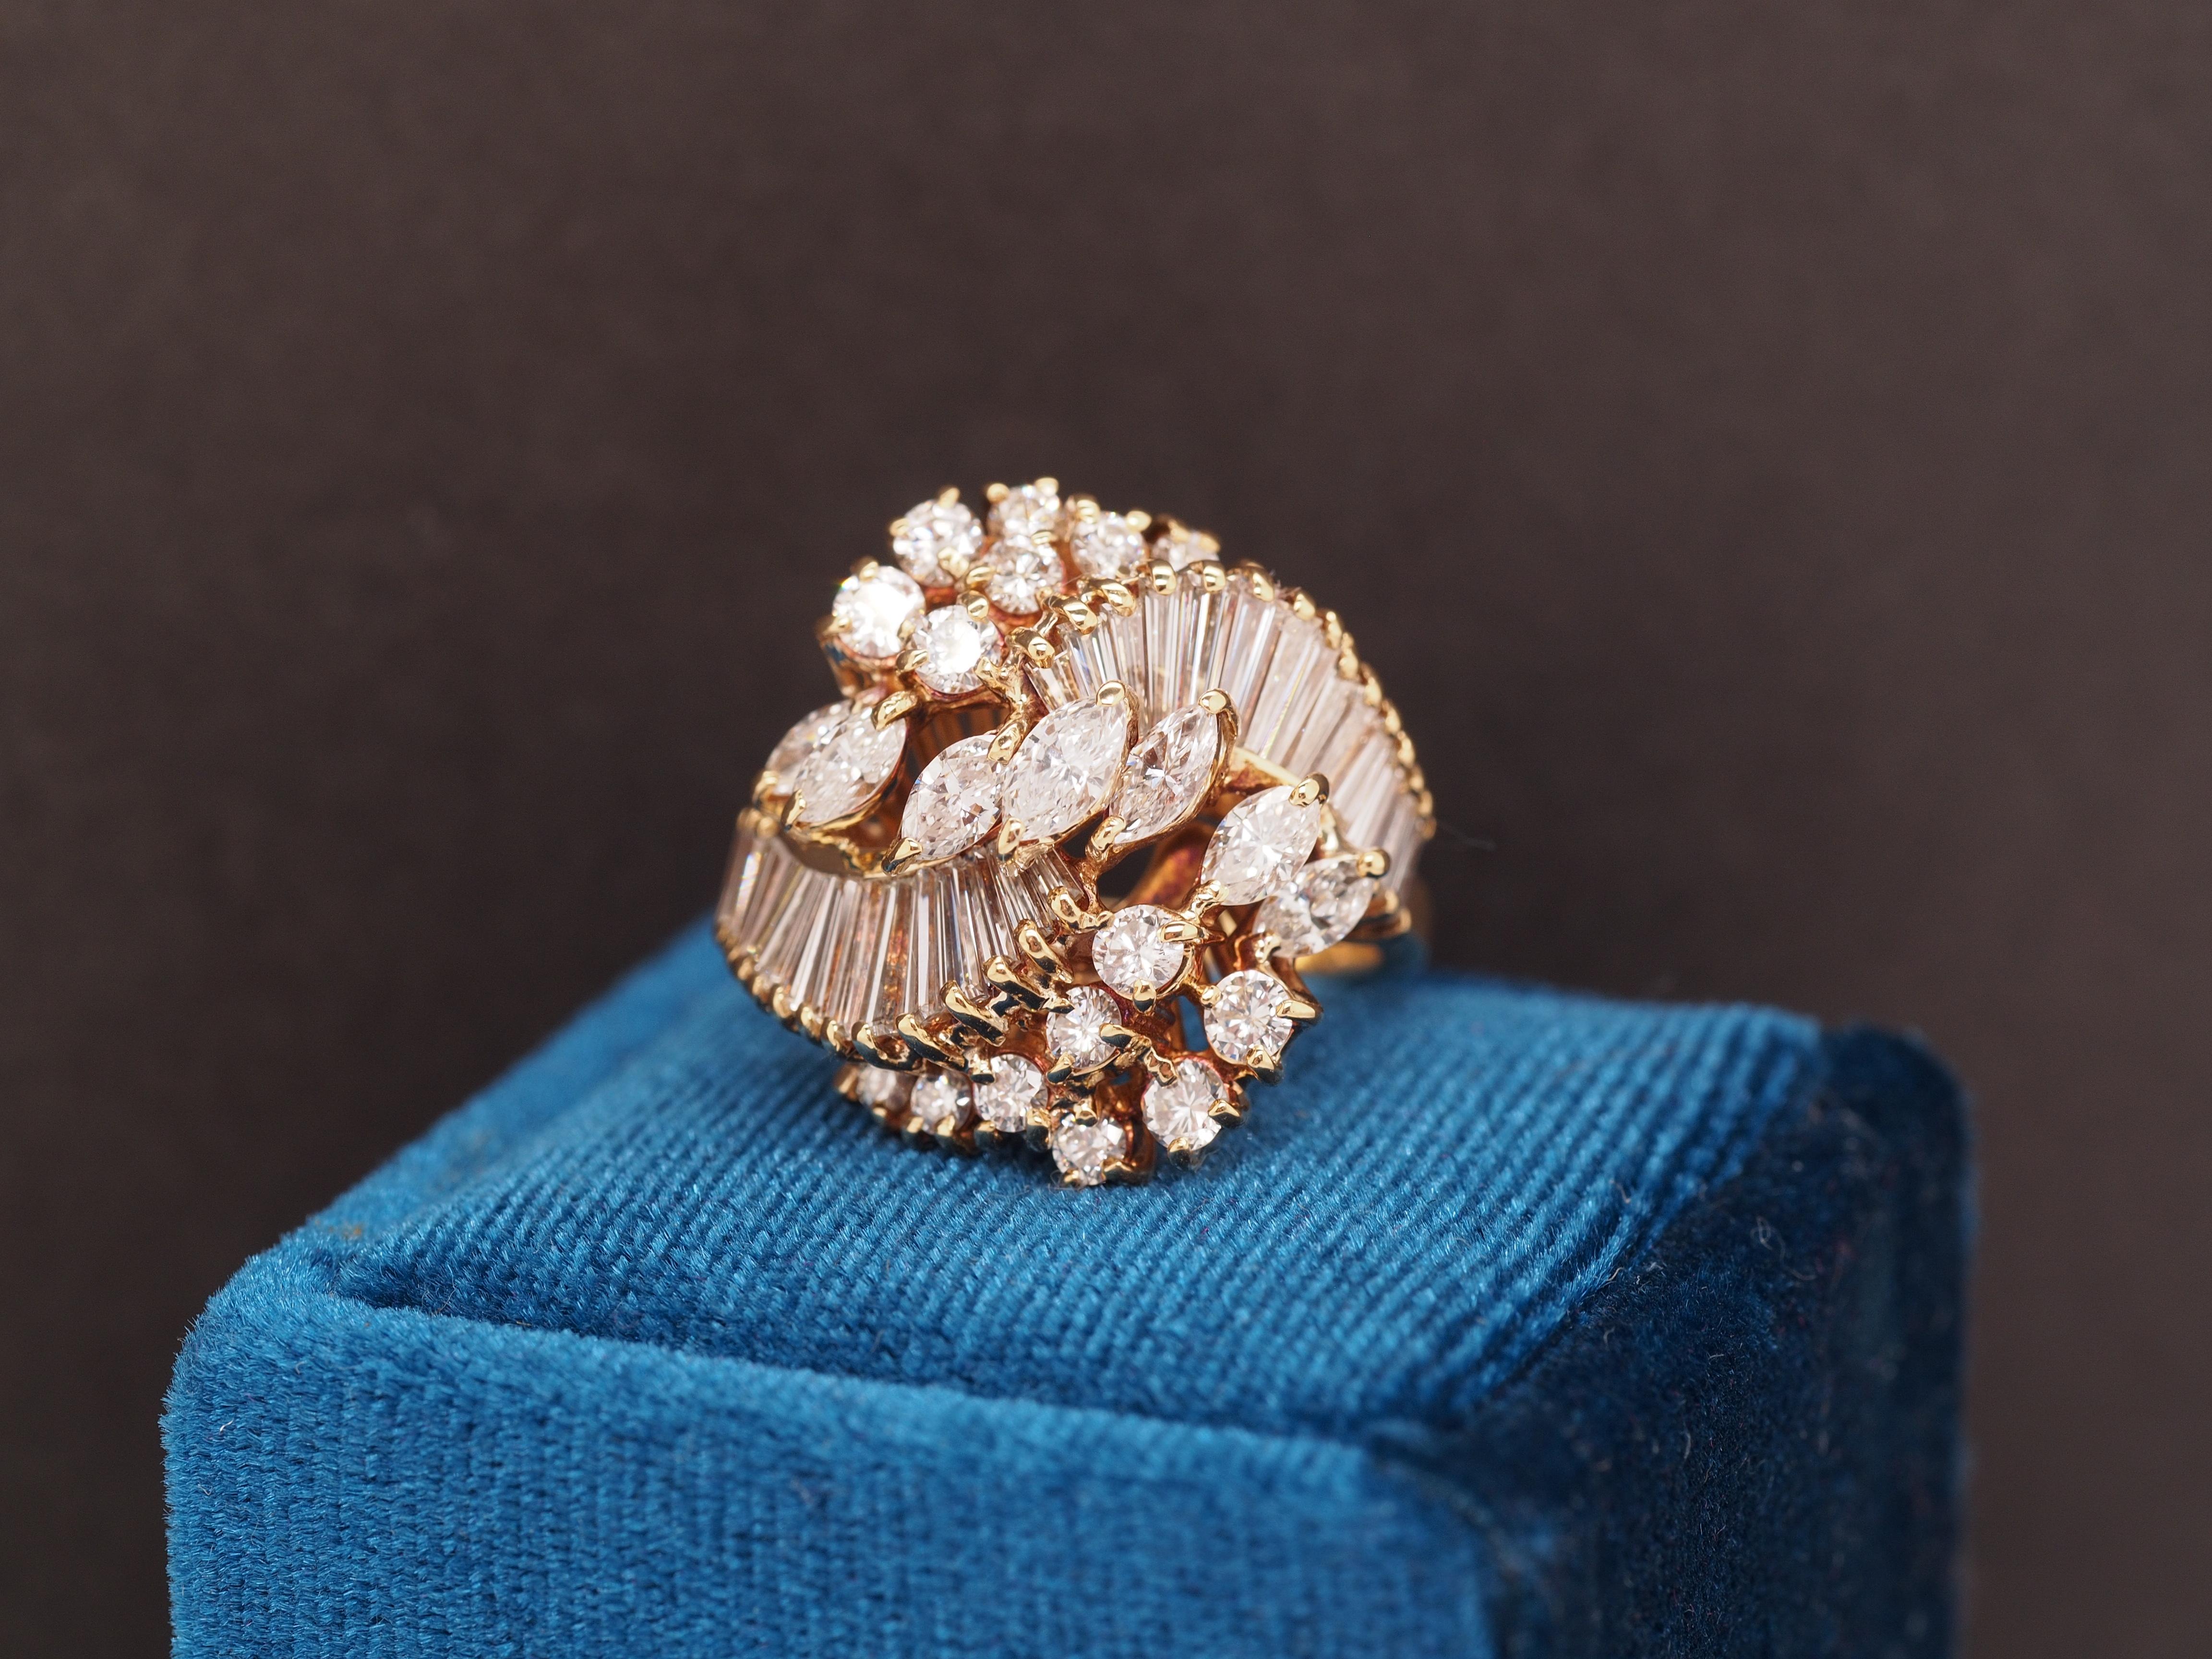 Year: 1990s
Item Details:
Ring Size: 6
Metal Type: 18K Yellow Gold [Hallmarked, and Tested]
Weight: 8.3 grams
Serial Numbers on Inner Shank: 16811
Diamond Details:
Natural Diamonds. Marquise, Baguette and Round Brilliant shapes. 3.00ct total weight,